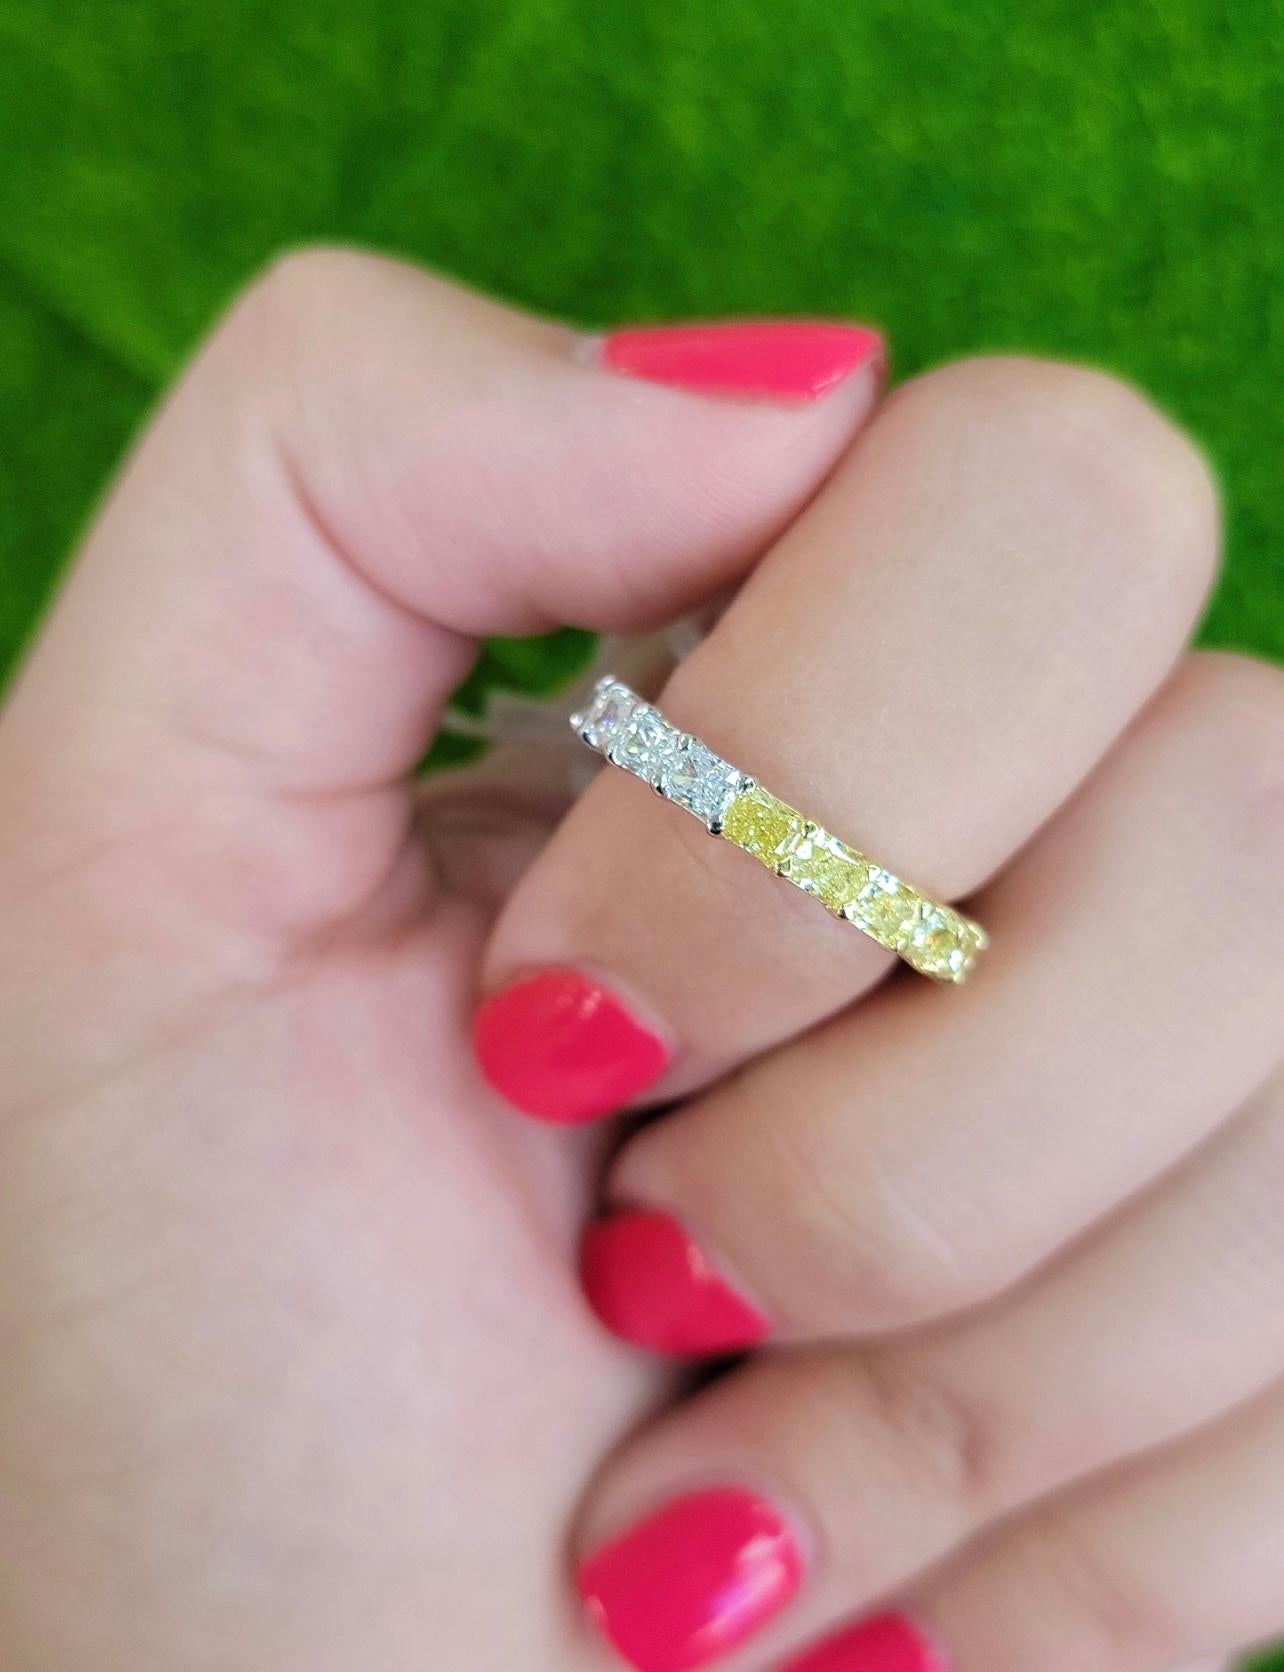 3.50 Total Carat Weight 
Fancy Yellow and E-F Color Diamonds
Elongated Radiant Cut diamonds
20 diamonds total
Average 0.17 carat per diamond
VS-VVS Clarity 
Set in 18k Yellow & Platinum 
Handmade in NYC 


This piece can be viewed before purchase in